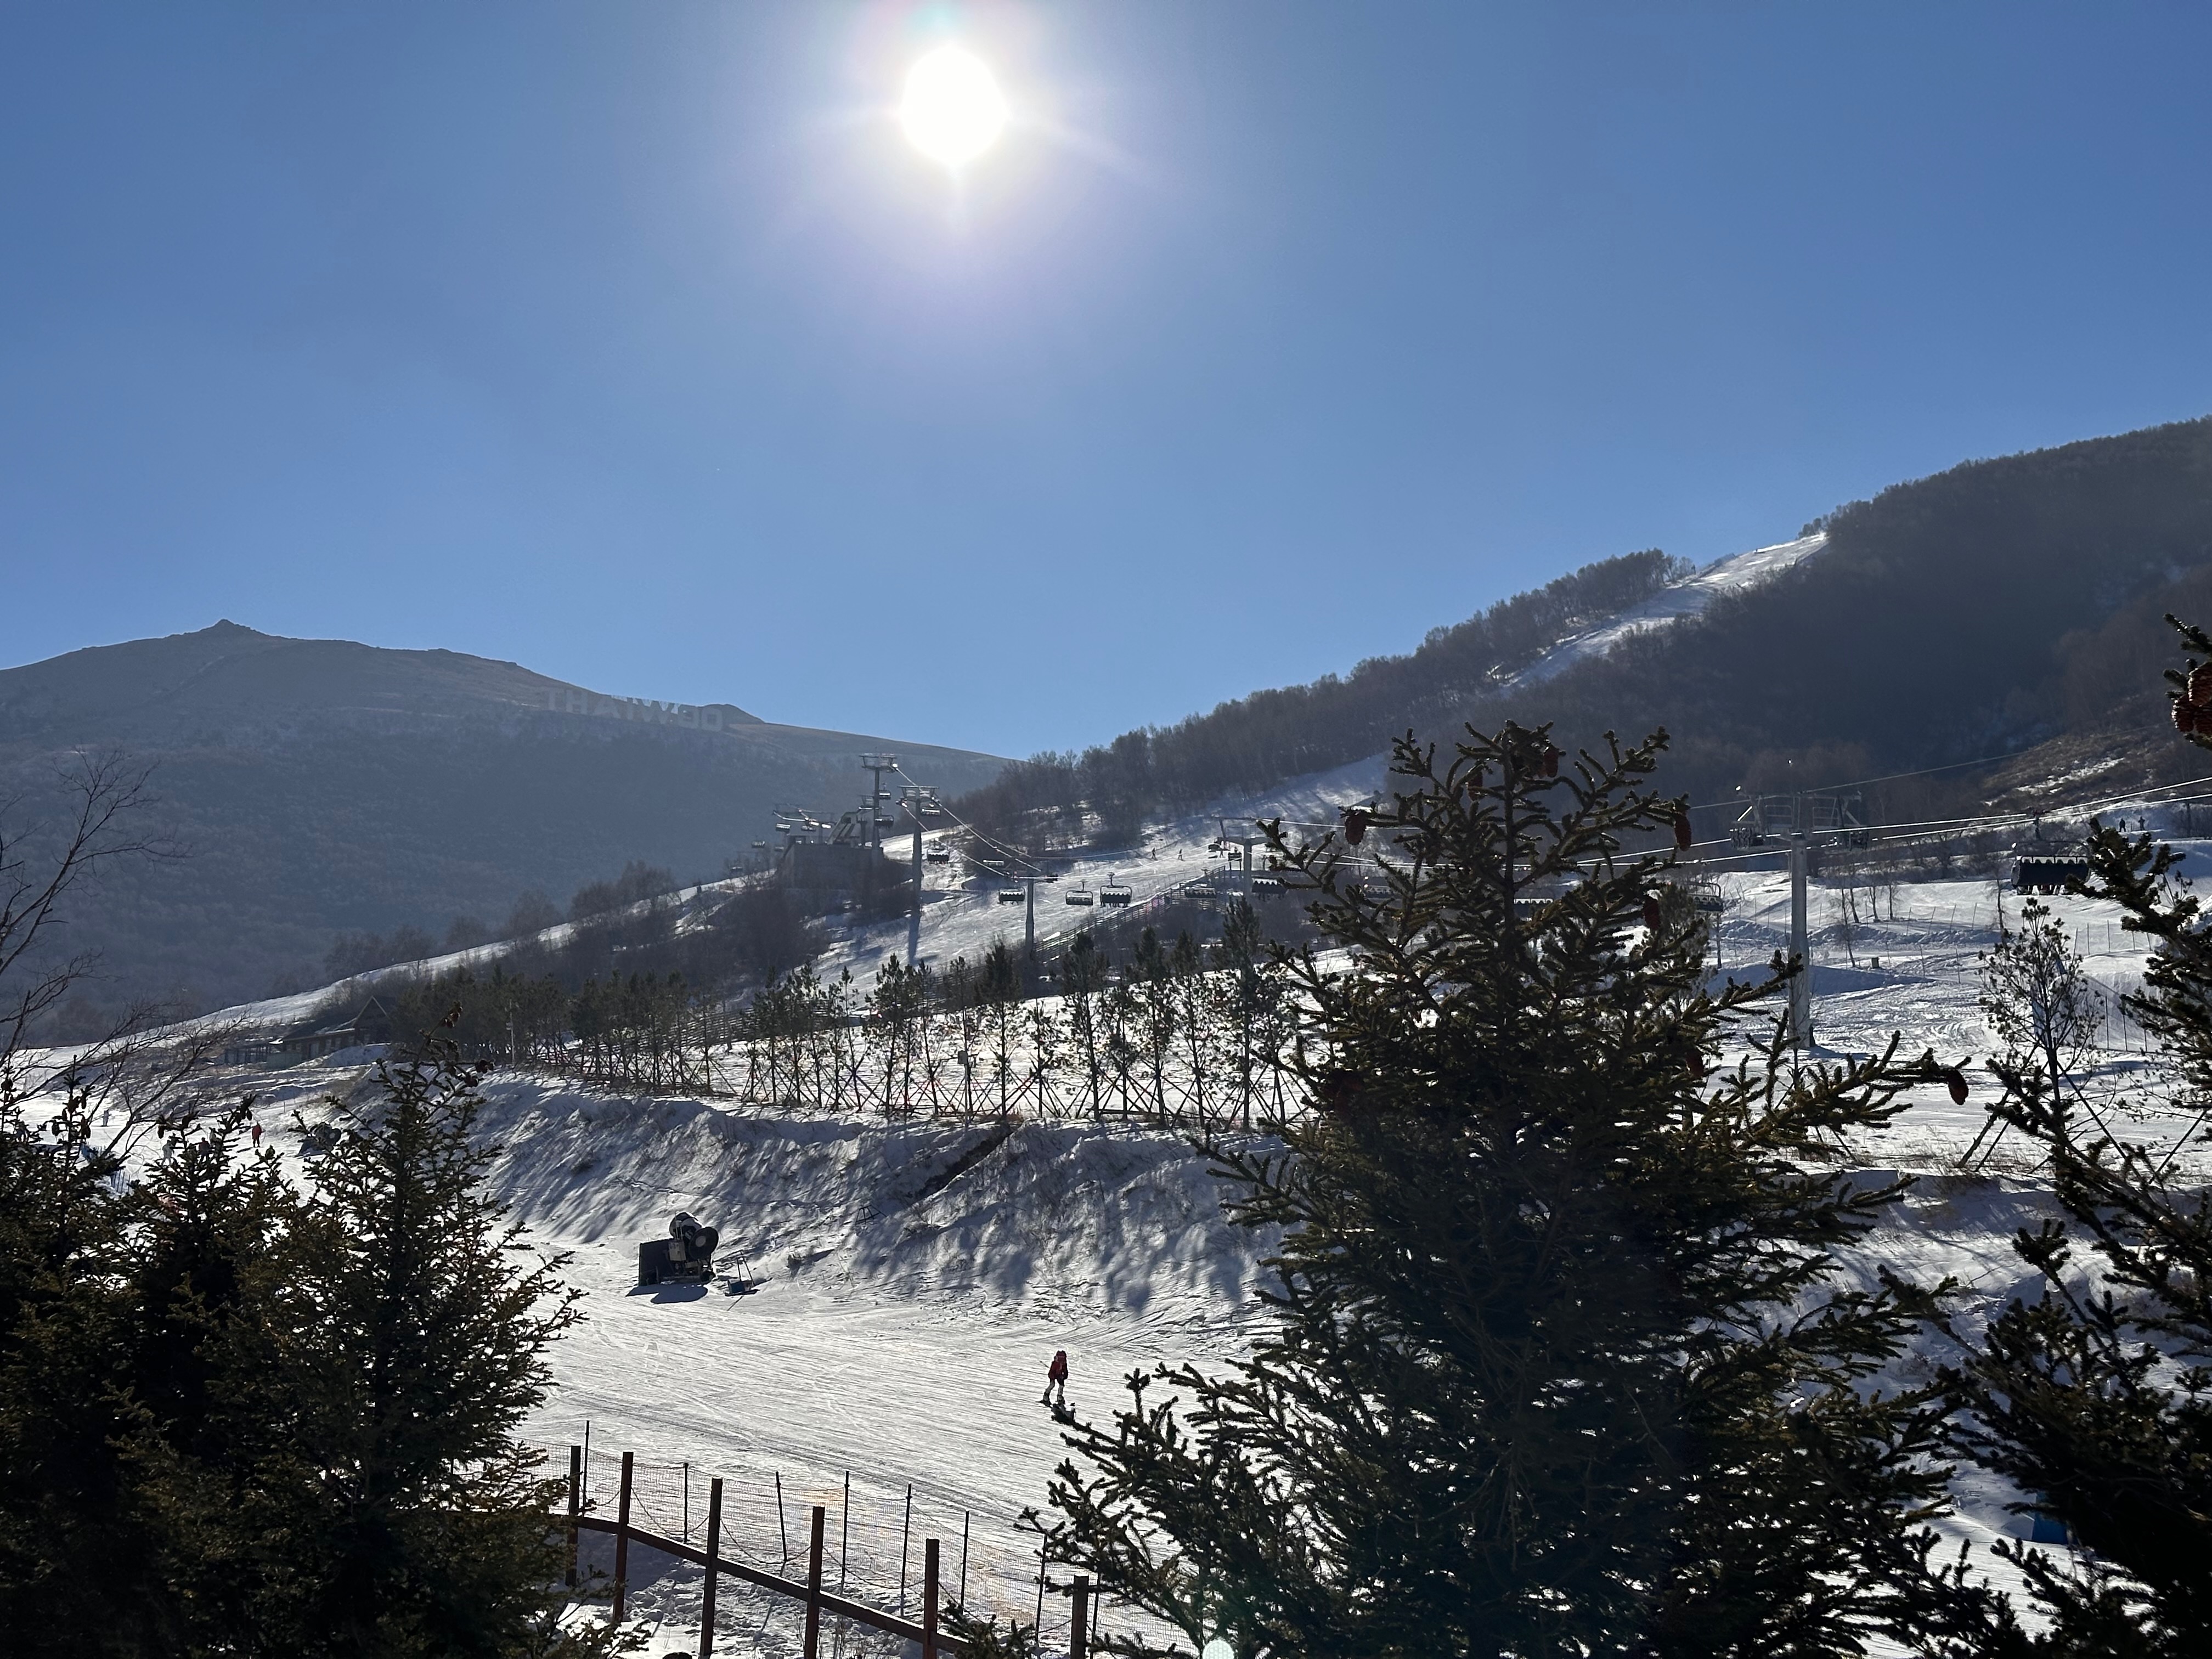 A view of the slopes at Thaiwoo.